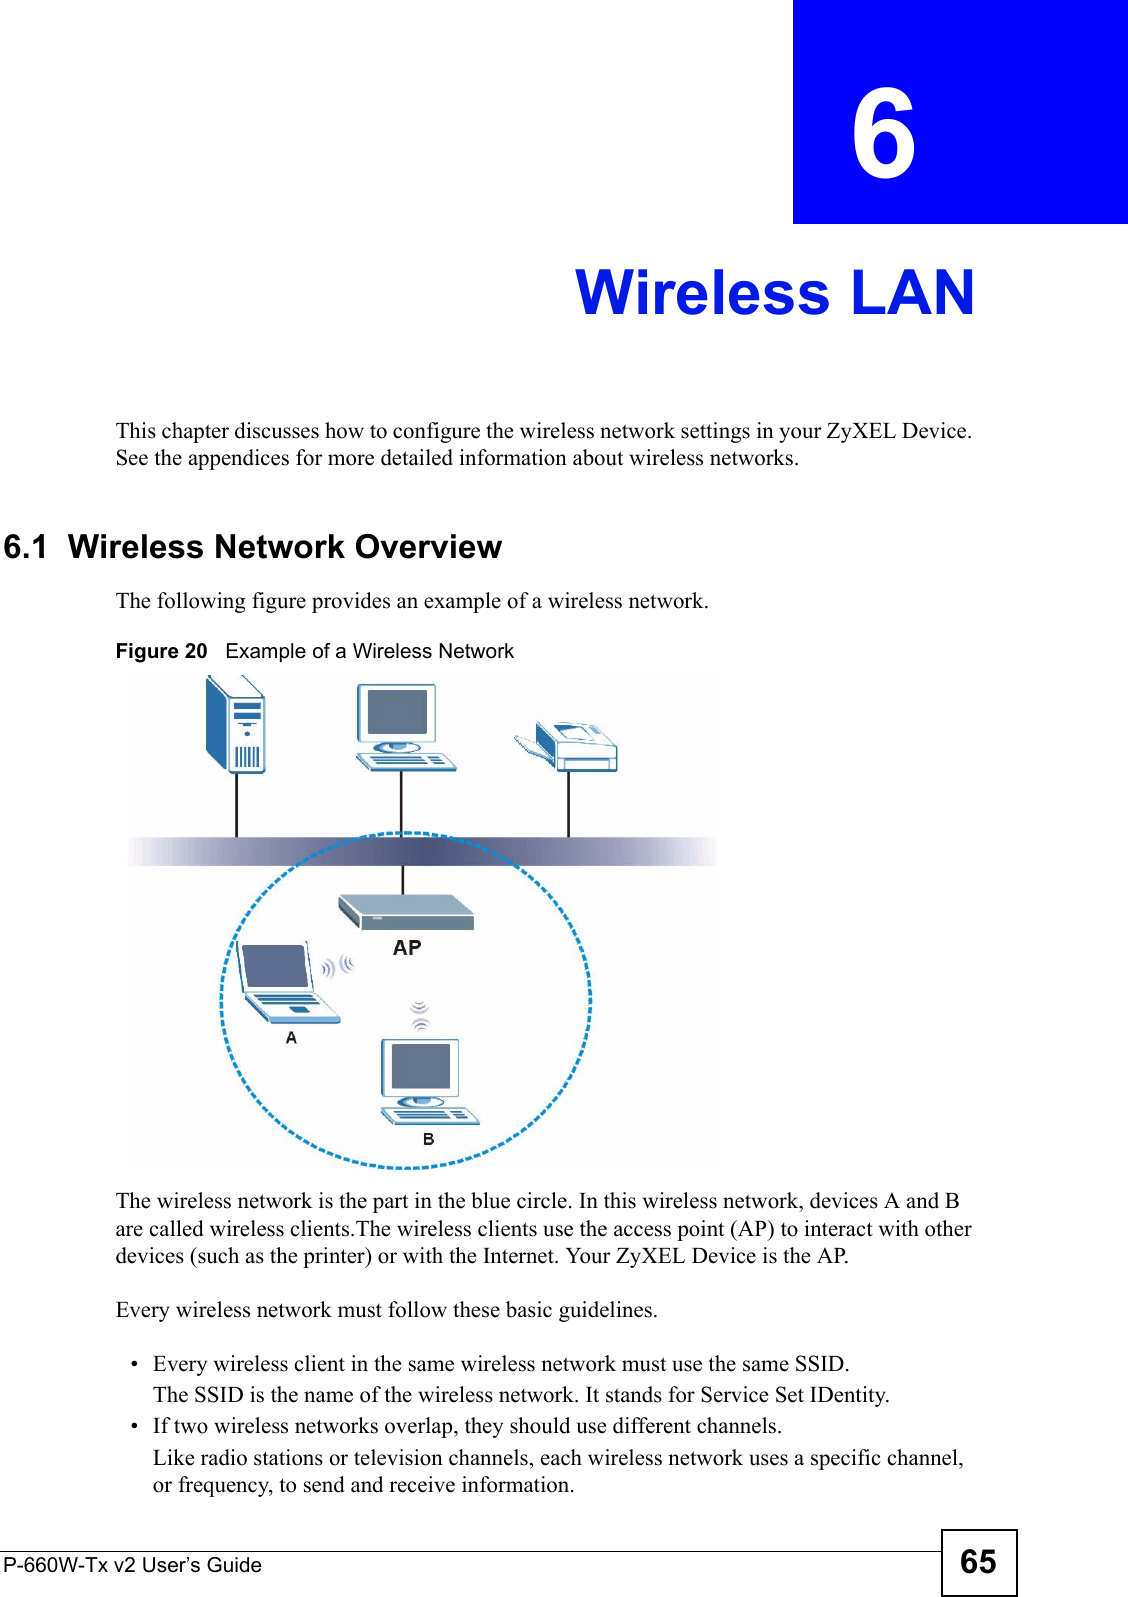 P-660W-Tx v2 User’s Guide 65CHAPTER  6 Wireless LANThis chapter discusses how to configure the wireless network settings in your ZyXEL Device. See the appendices for more detailed information about wireless networks.6.1  Wireless Network OverviewThe following figure provides an example of a wireless network.Figure 20   Example of a Wireless NetworkThe wireless network is the part in the blue circle. In this wireless network, devices A and B are called wireless clients.The wireless clients use the access point (AP) to interact with other devices (such as the printer) or with the Internet. Your ZyXEL Device is the AP.Every wireless network must follow these basic guidelines.• Every wireless client in the same wireless network must use the same SSID.The SSID is the name of the wireless network. It stands for Service Set IDentity.• If two wireless networks overlap, they should use different channels.Like radio stations or television channels, each wireless network uses a specific channel, or frequency, to send and receive information.